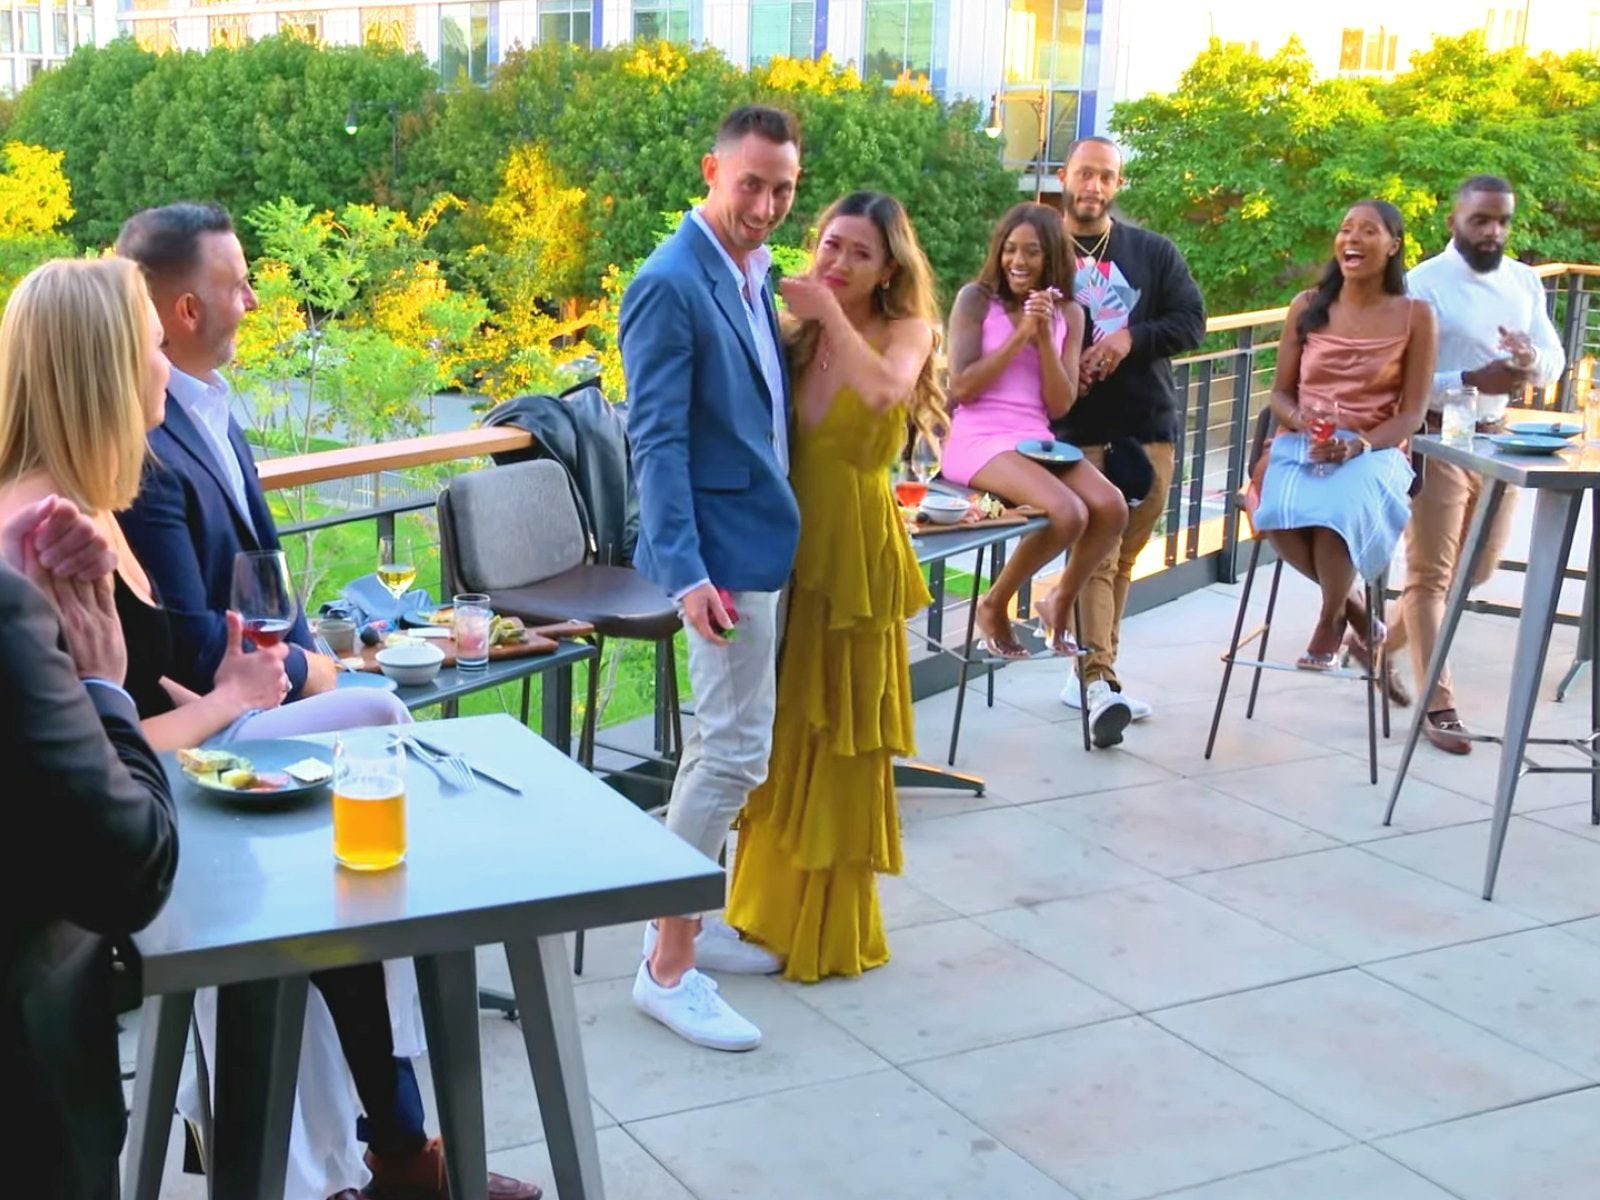 'Married at First Sight' Decision Day All four couples shockingly